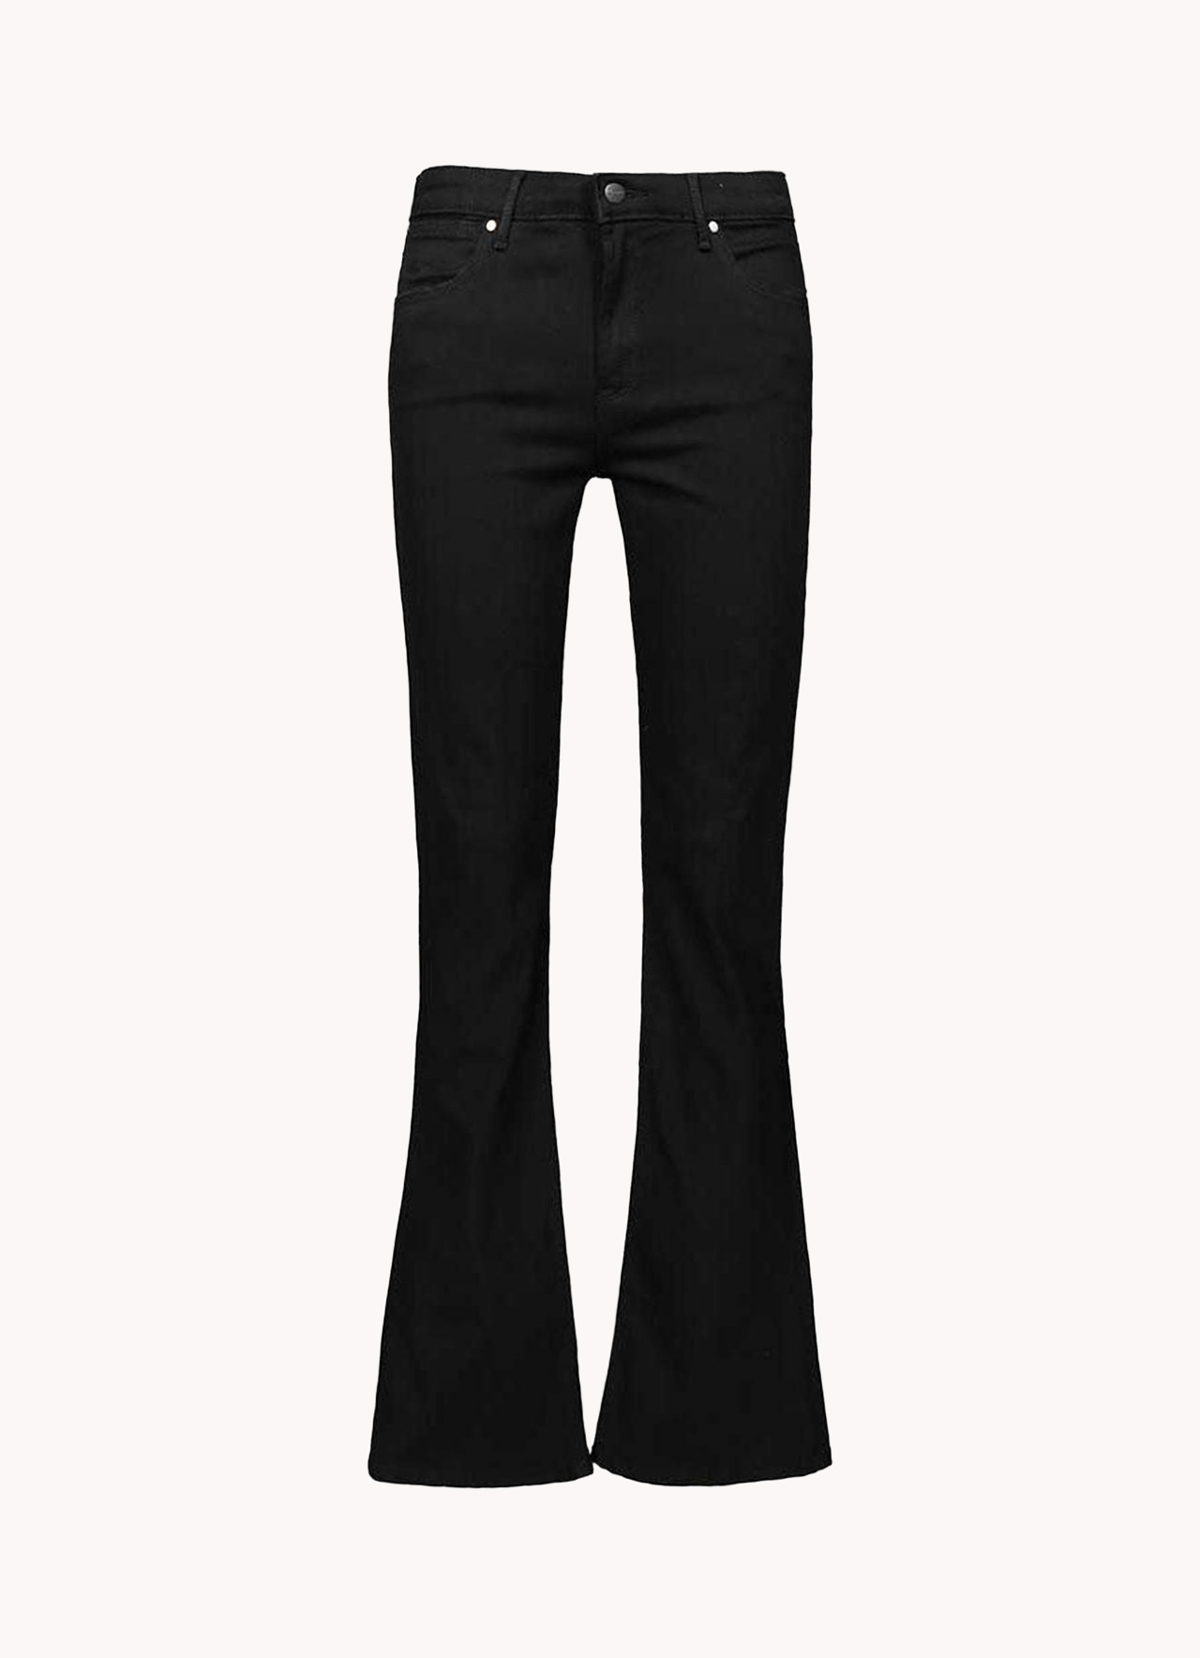  Flare jeans negros